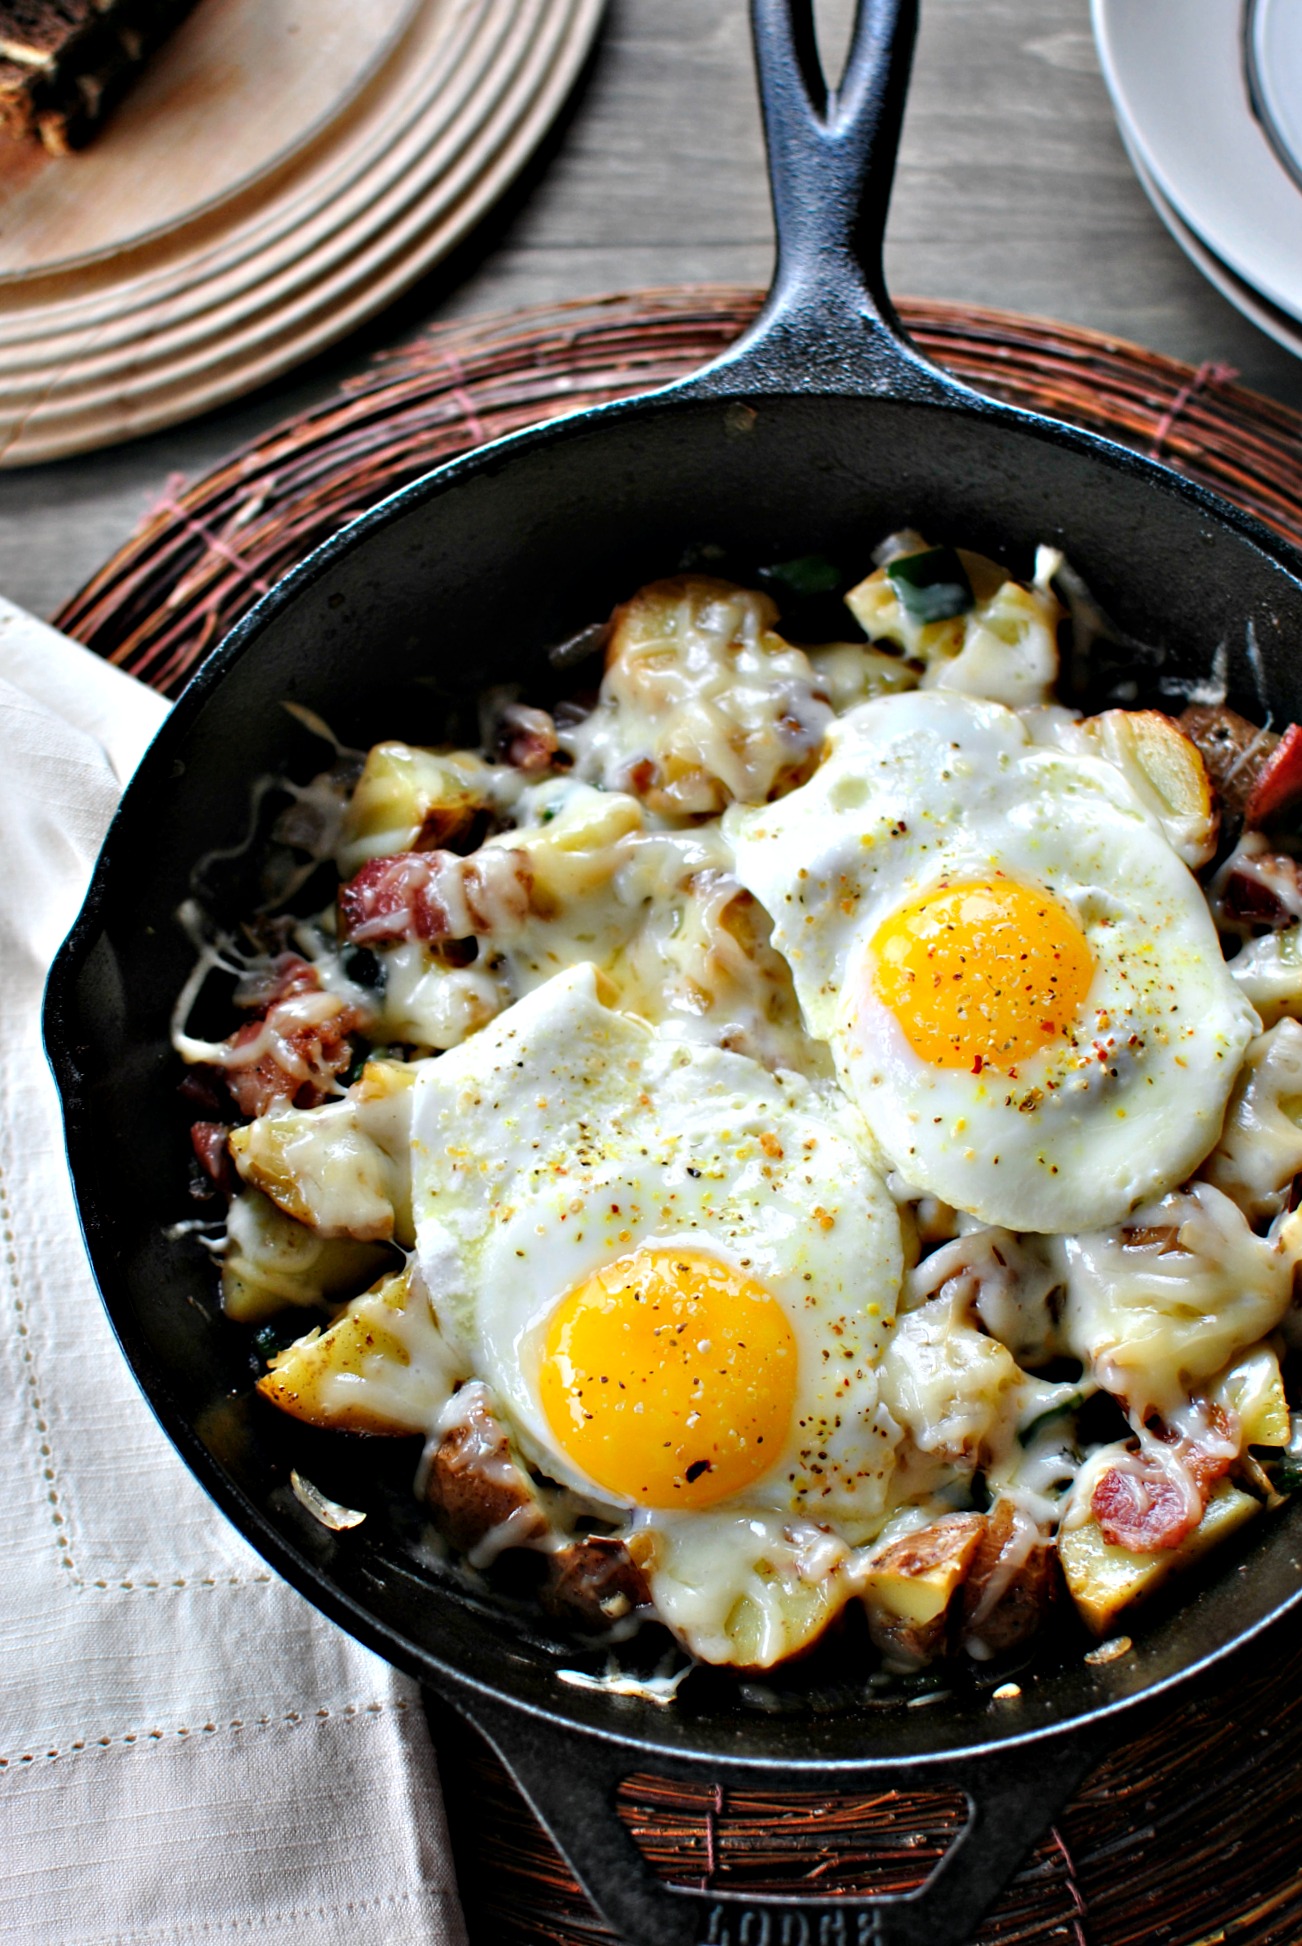 http://www.simplyscratch.com/wp-content/uploads/2014/04/Bacon-Potato-+-Poblano-Breakfast-Skillet-l-www.SimplyScratch.com-two-eggs-on-top.jpg